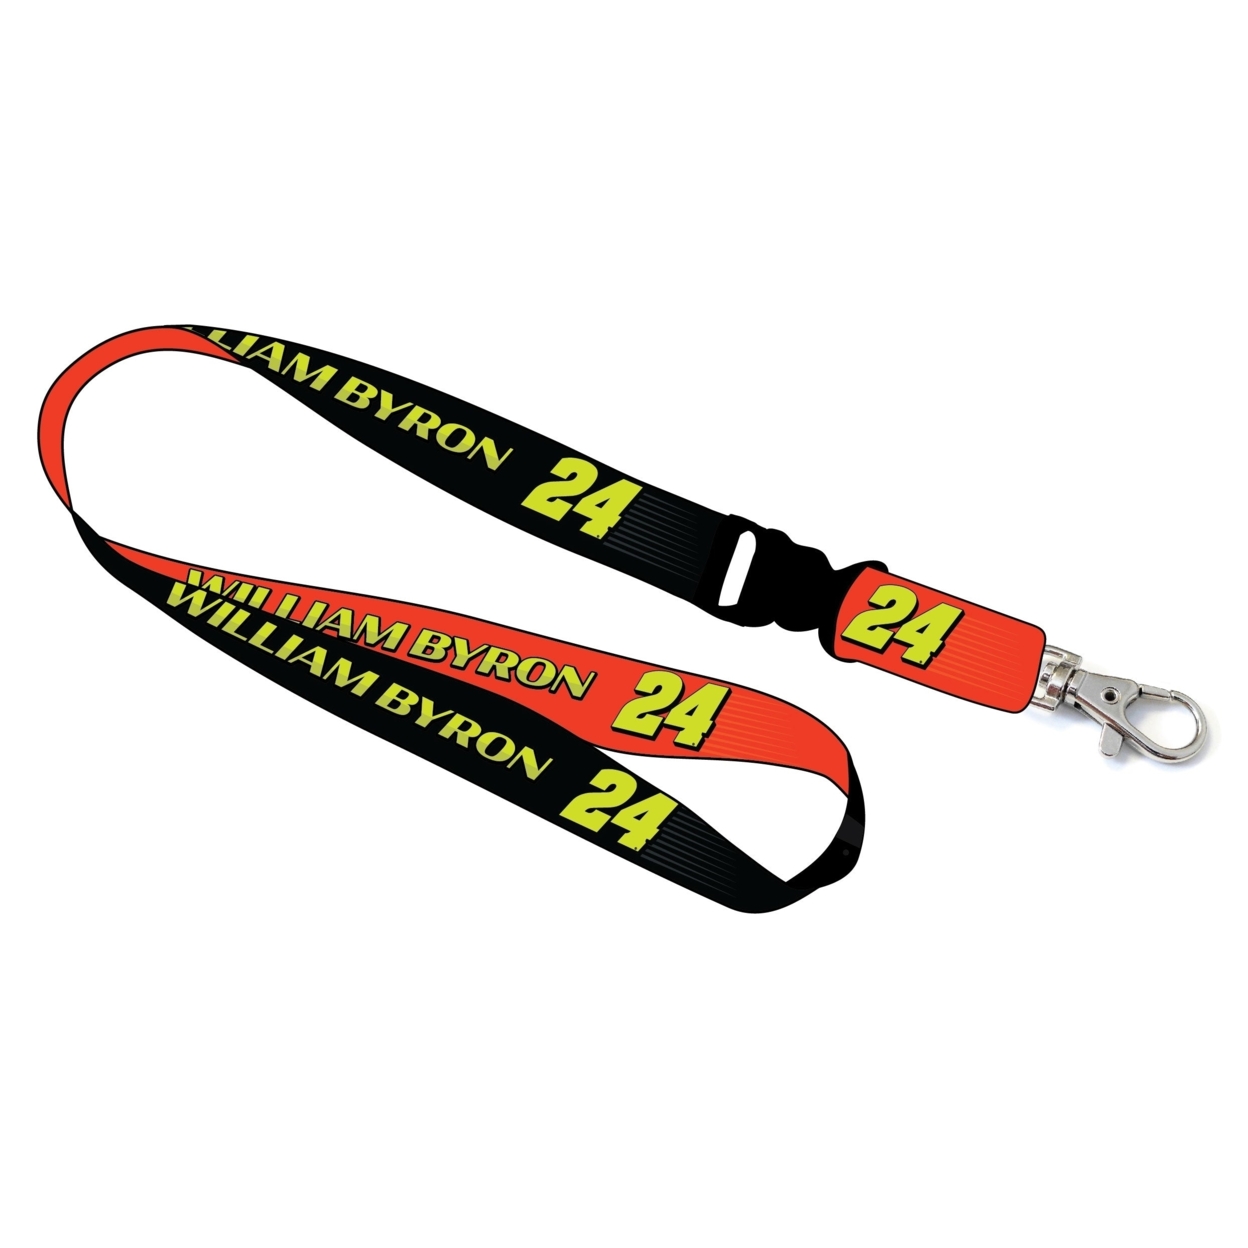 William Byron #24 NASCAR Cup Series Lanyard New For 2021